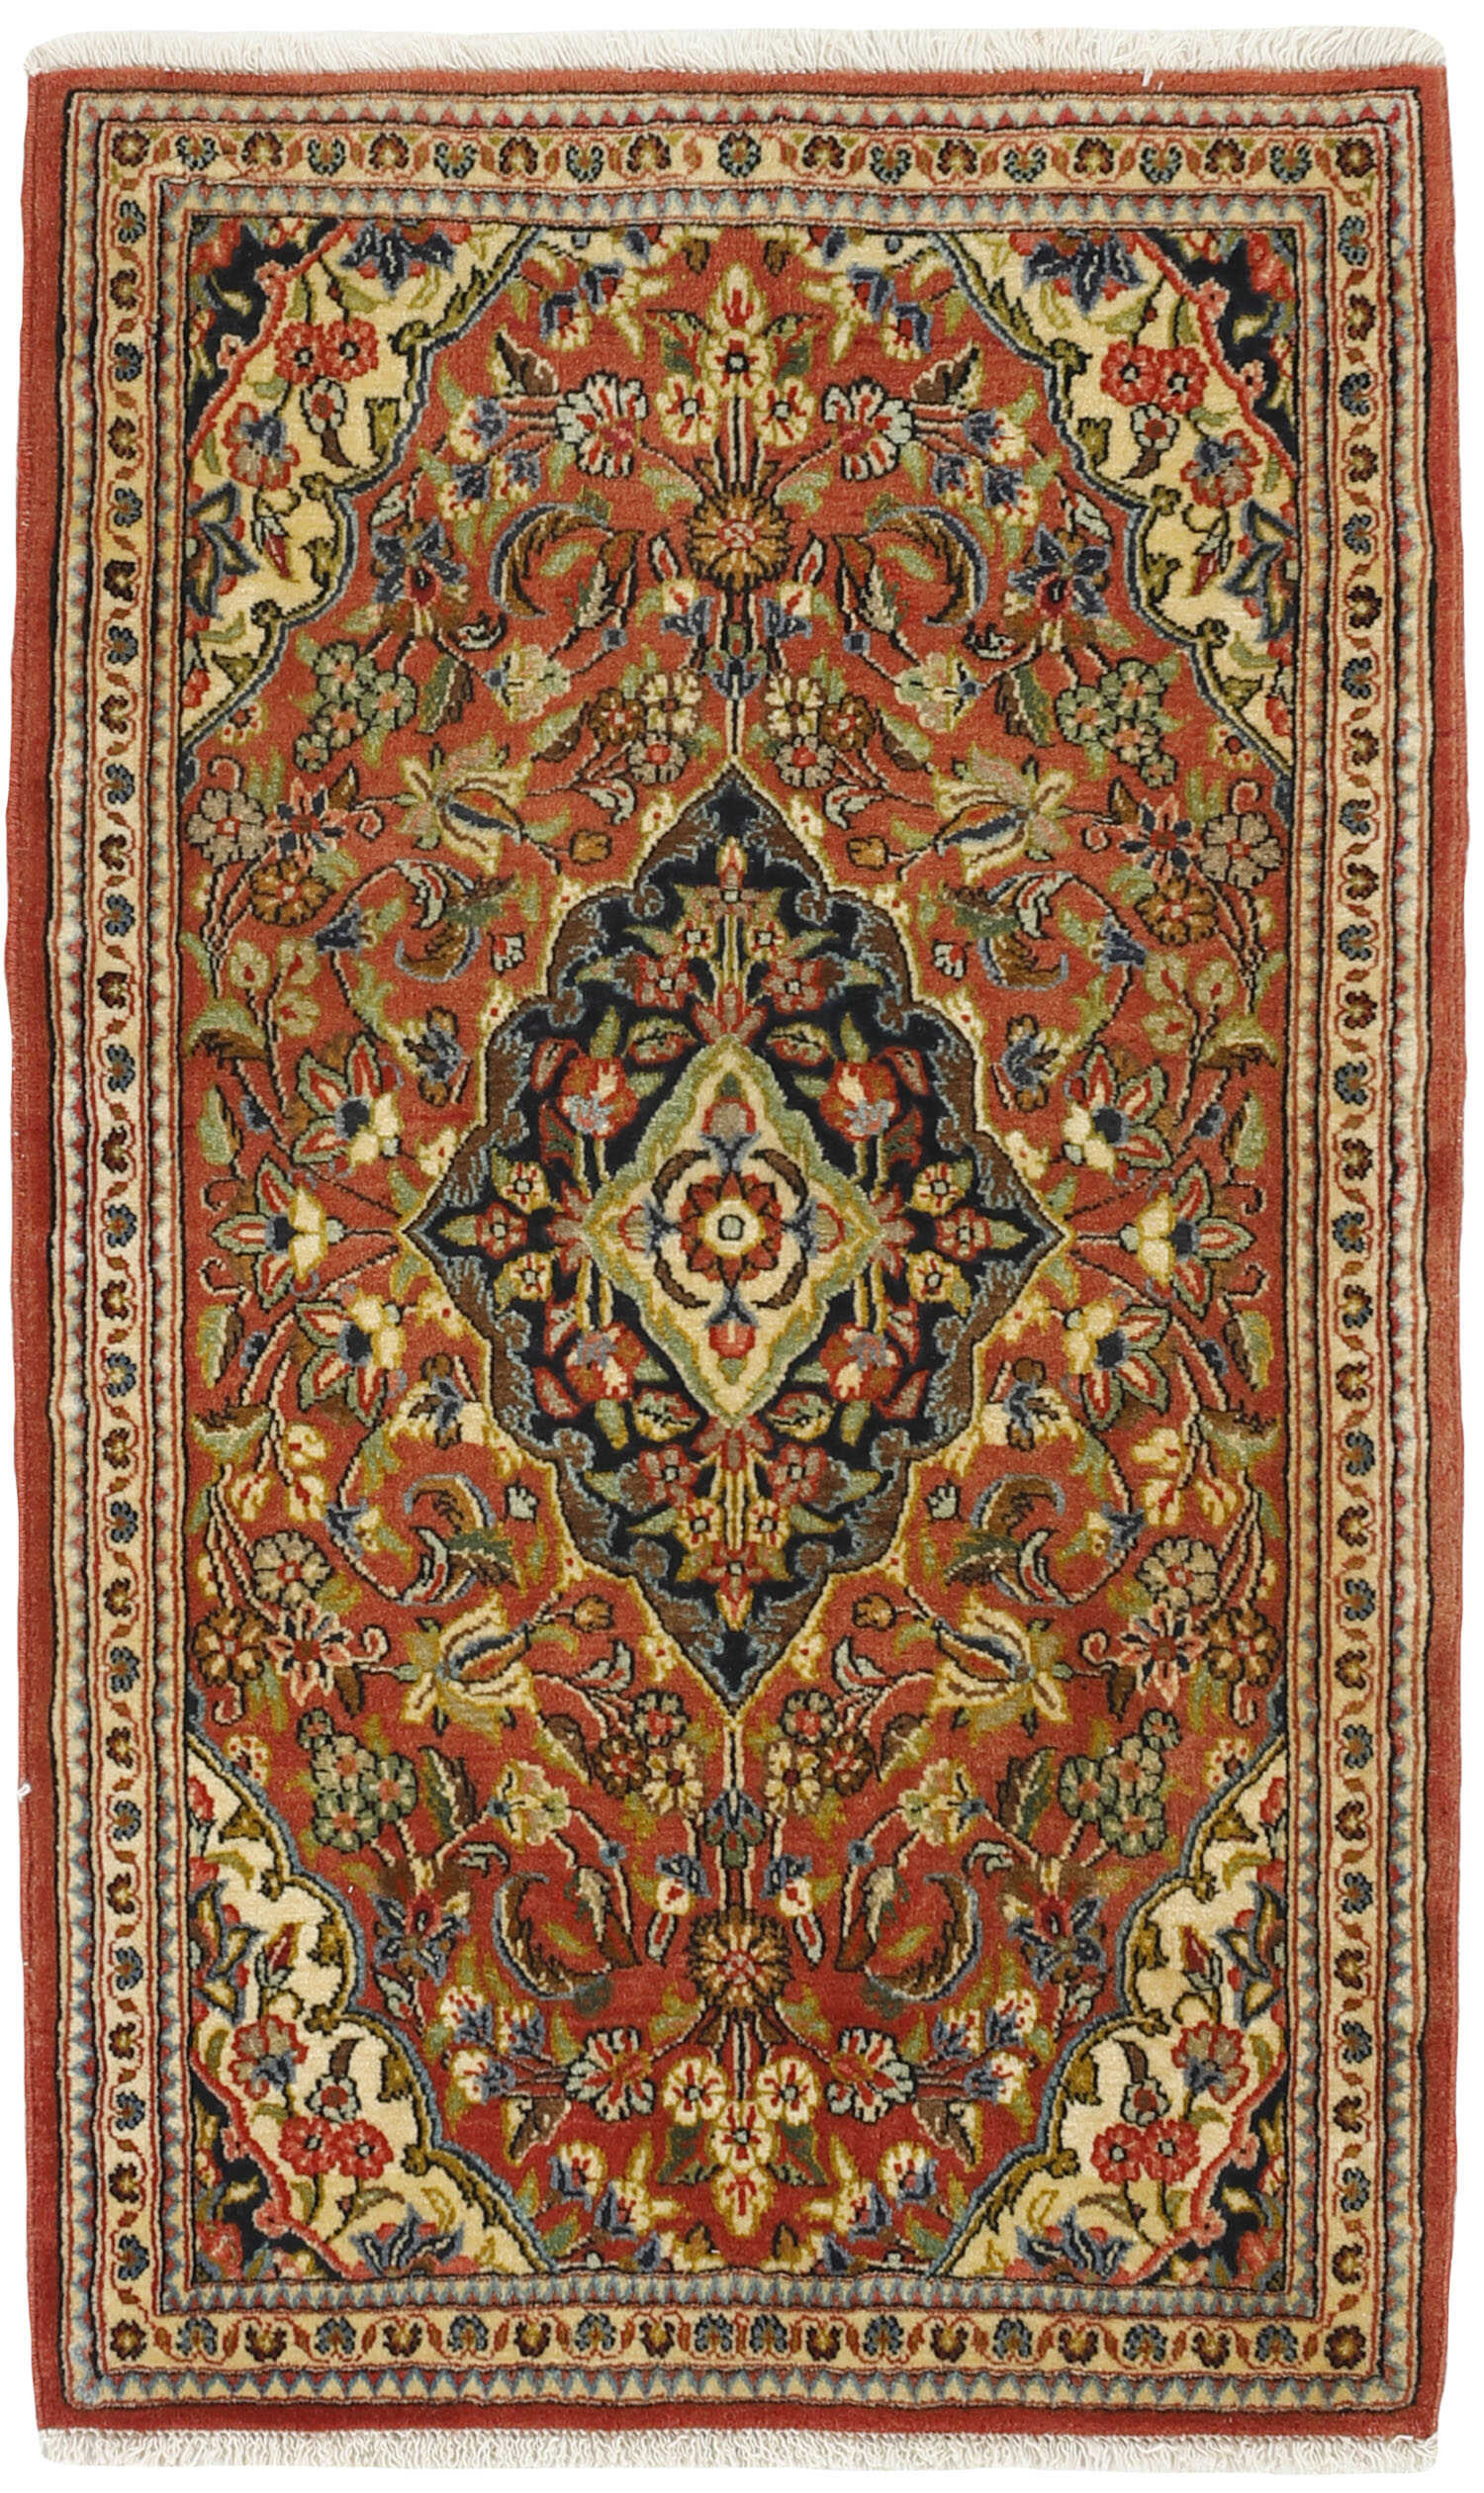 Authentic persian rug with a traditional floral design in red and beige